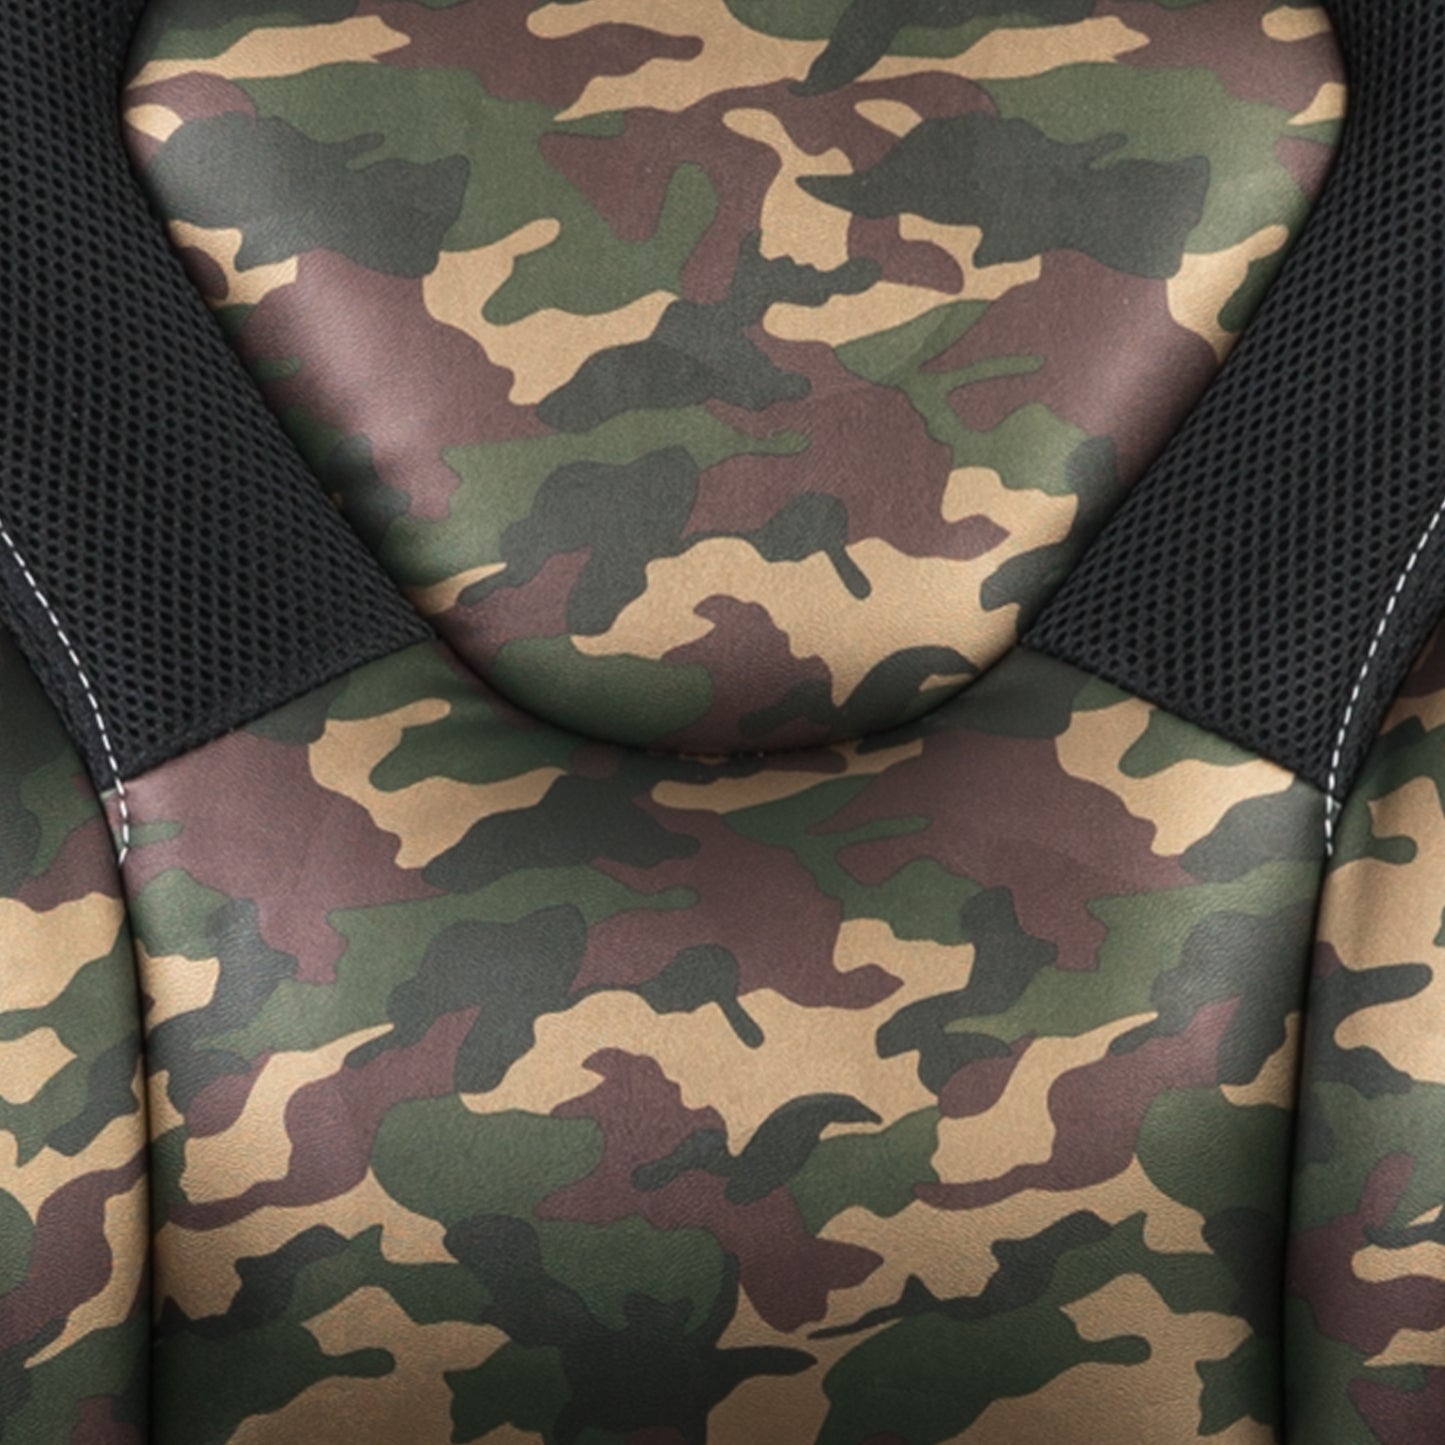 Optis Gaming Desk with Camouflage Chair